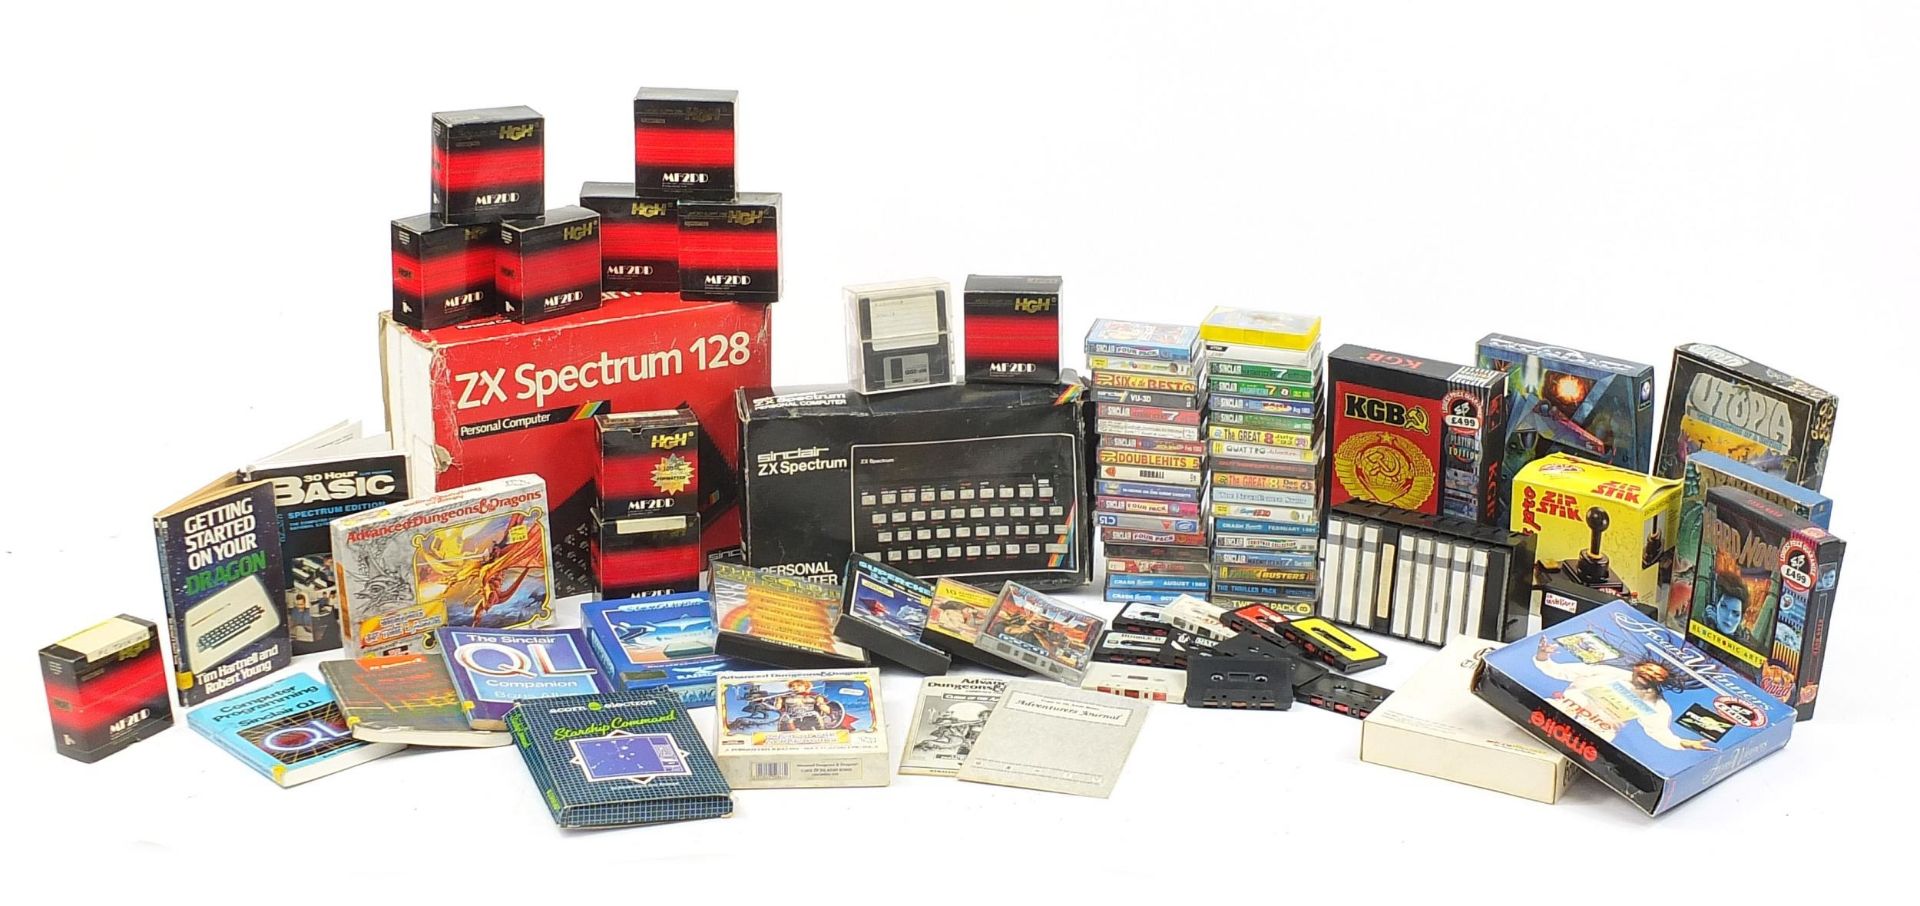 Vintage consoles, accessories and games including ZX Spectrum 128, Sinclair ZX Spectrum, Advanced